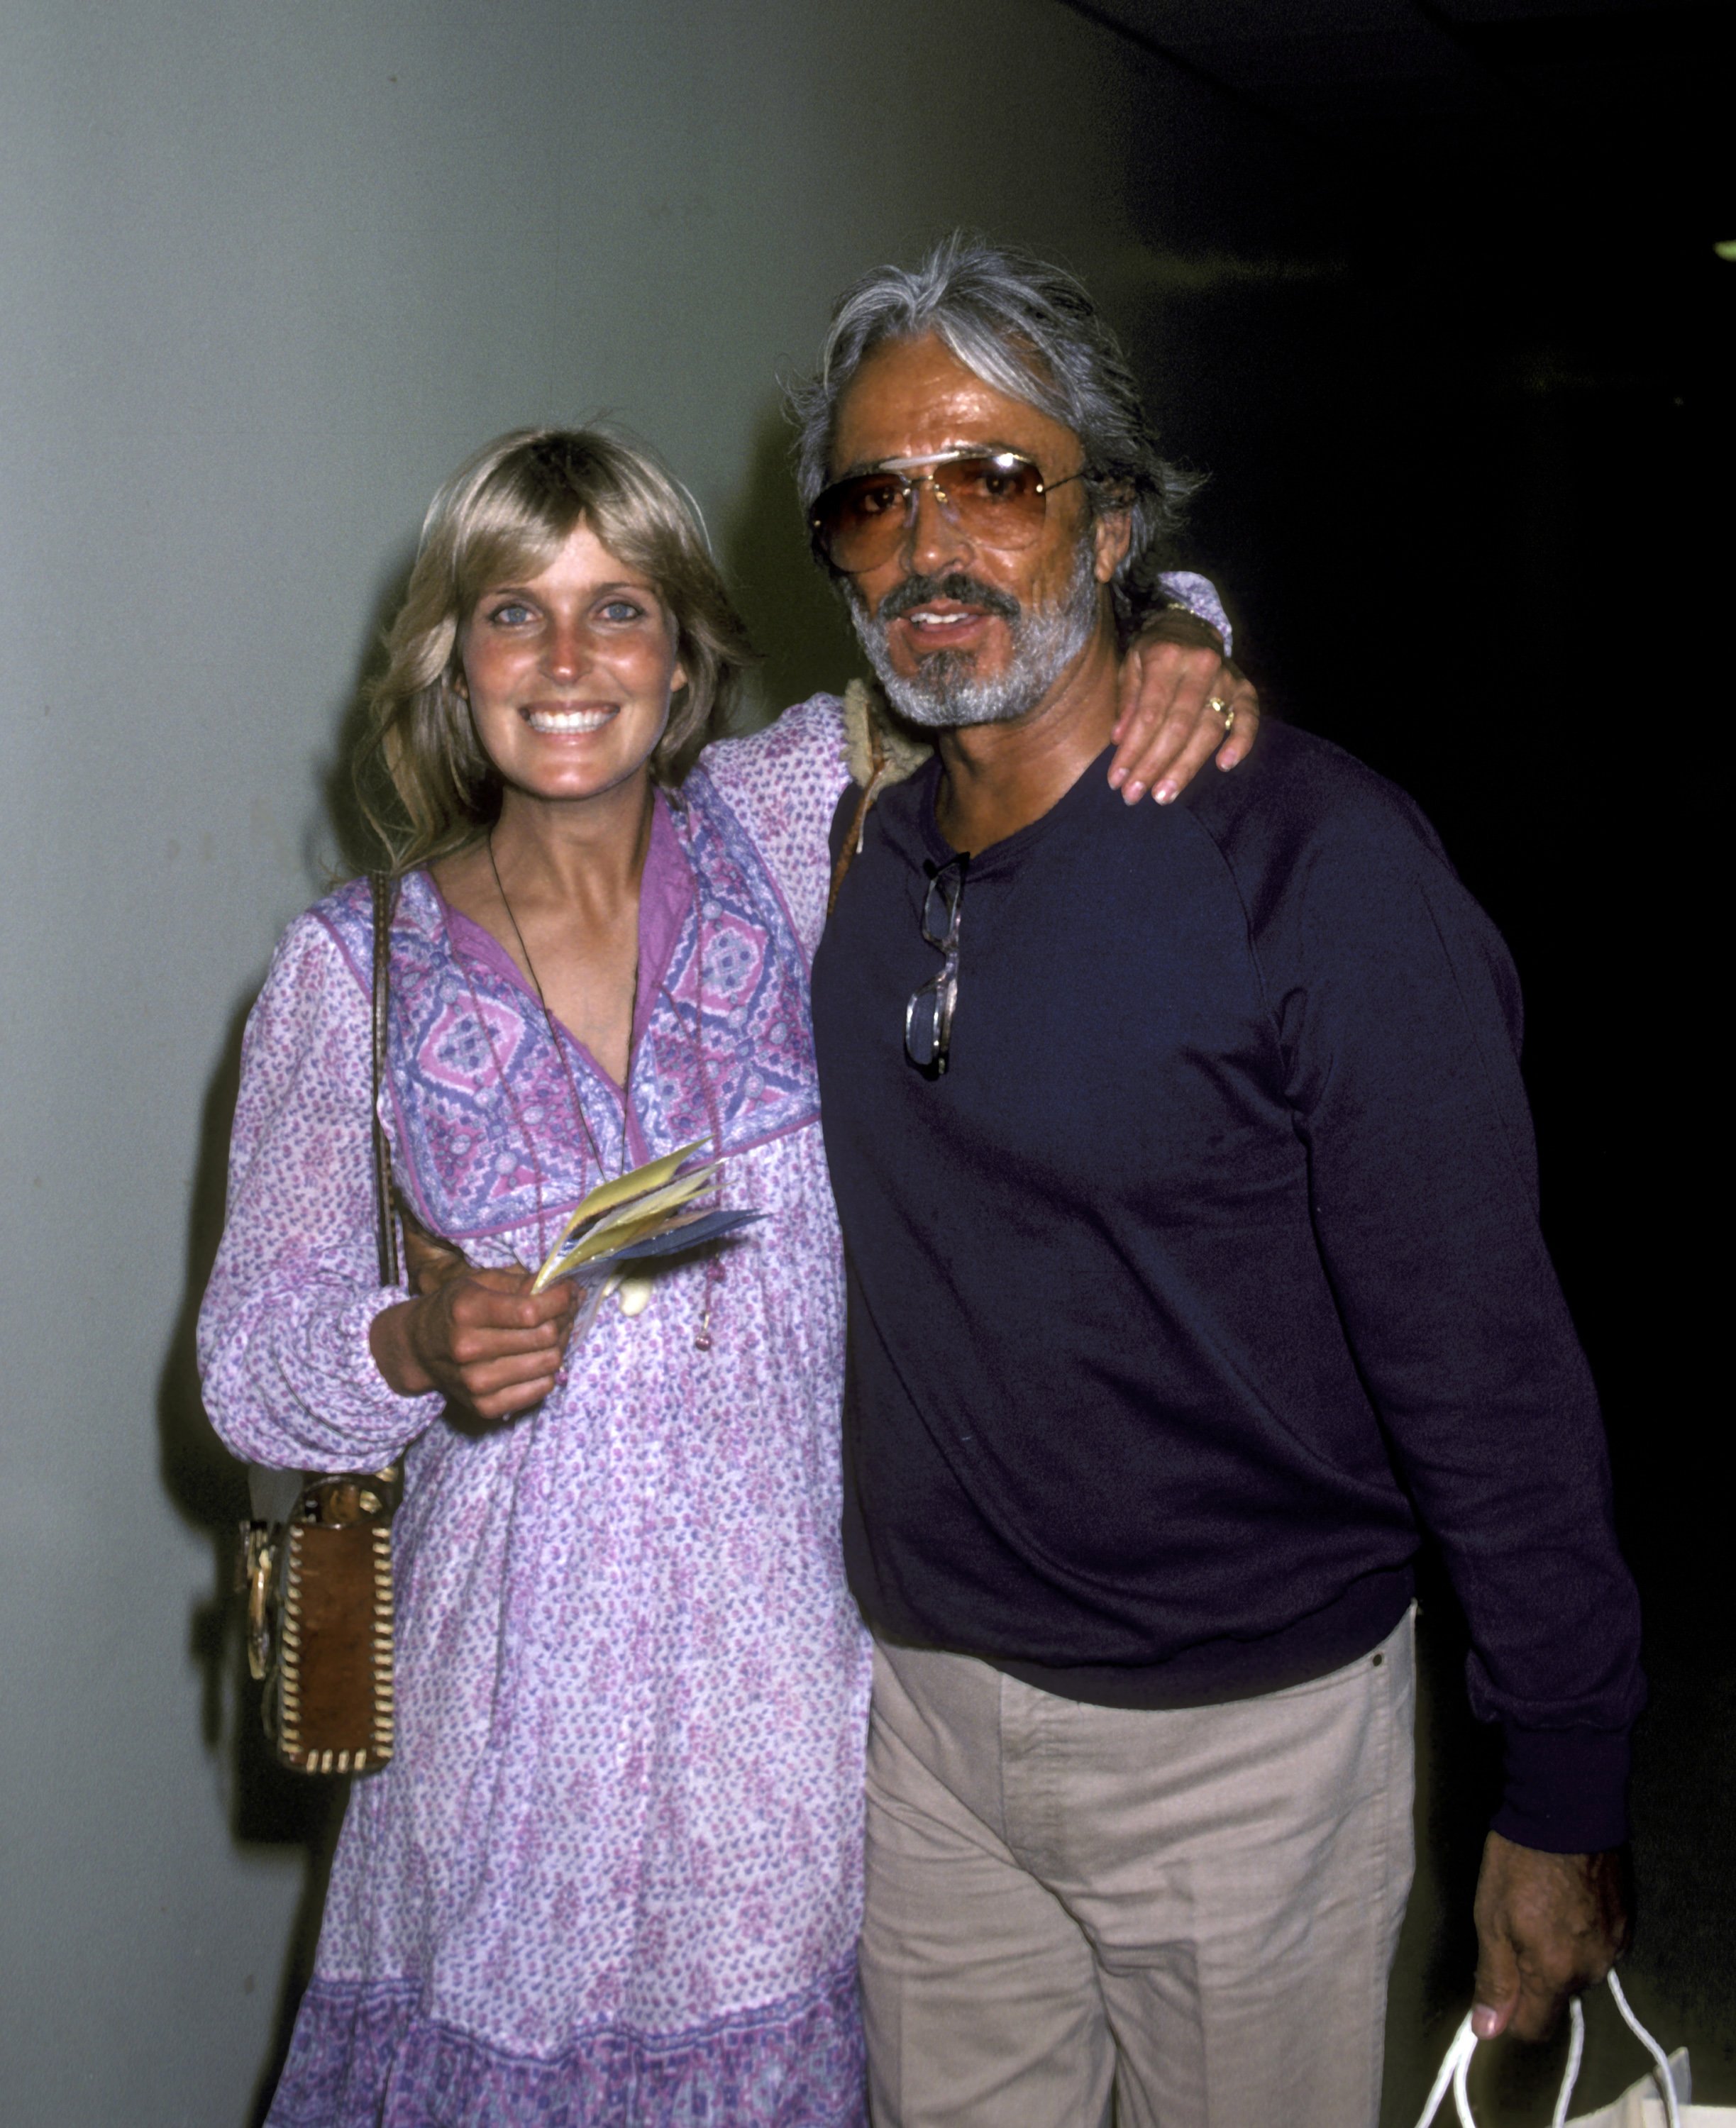 Bo Derek and John Derek were Sighted at La Guardia Airport - July 22, 1981, at La Guardia Airport in New York City, New York, United States. | Source: Getty Images